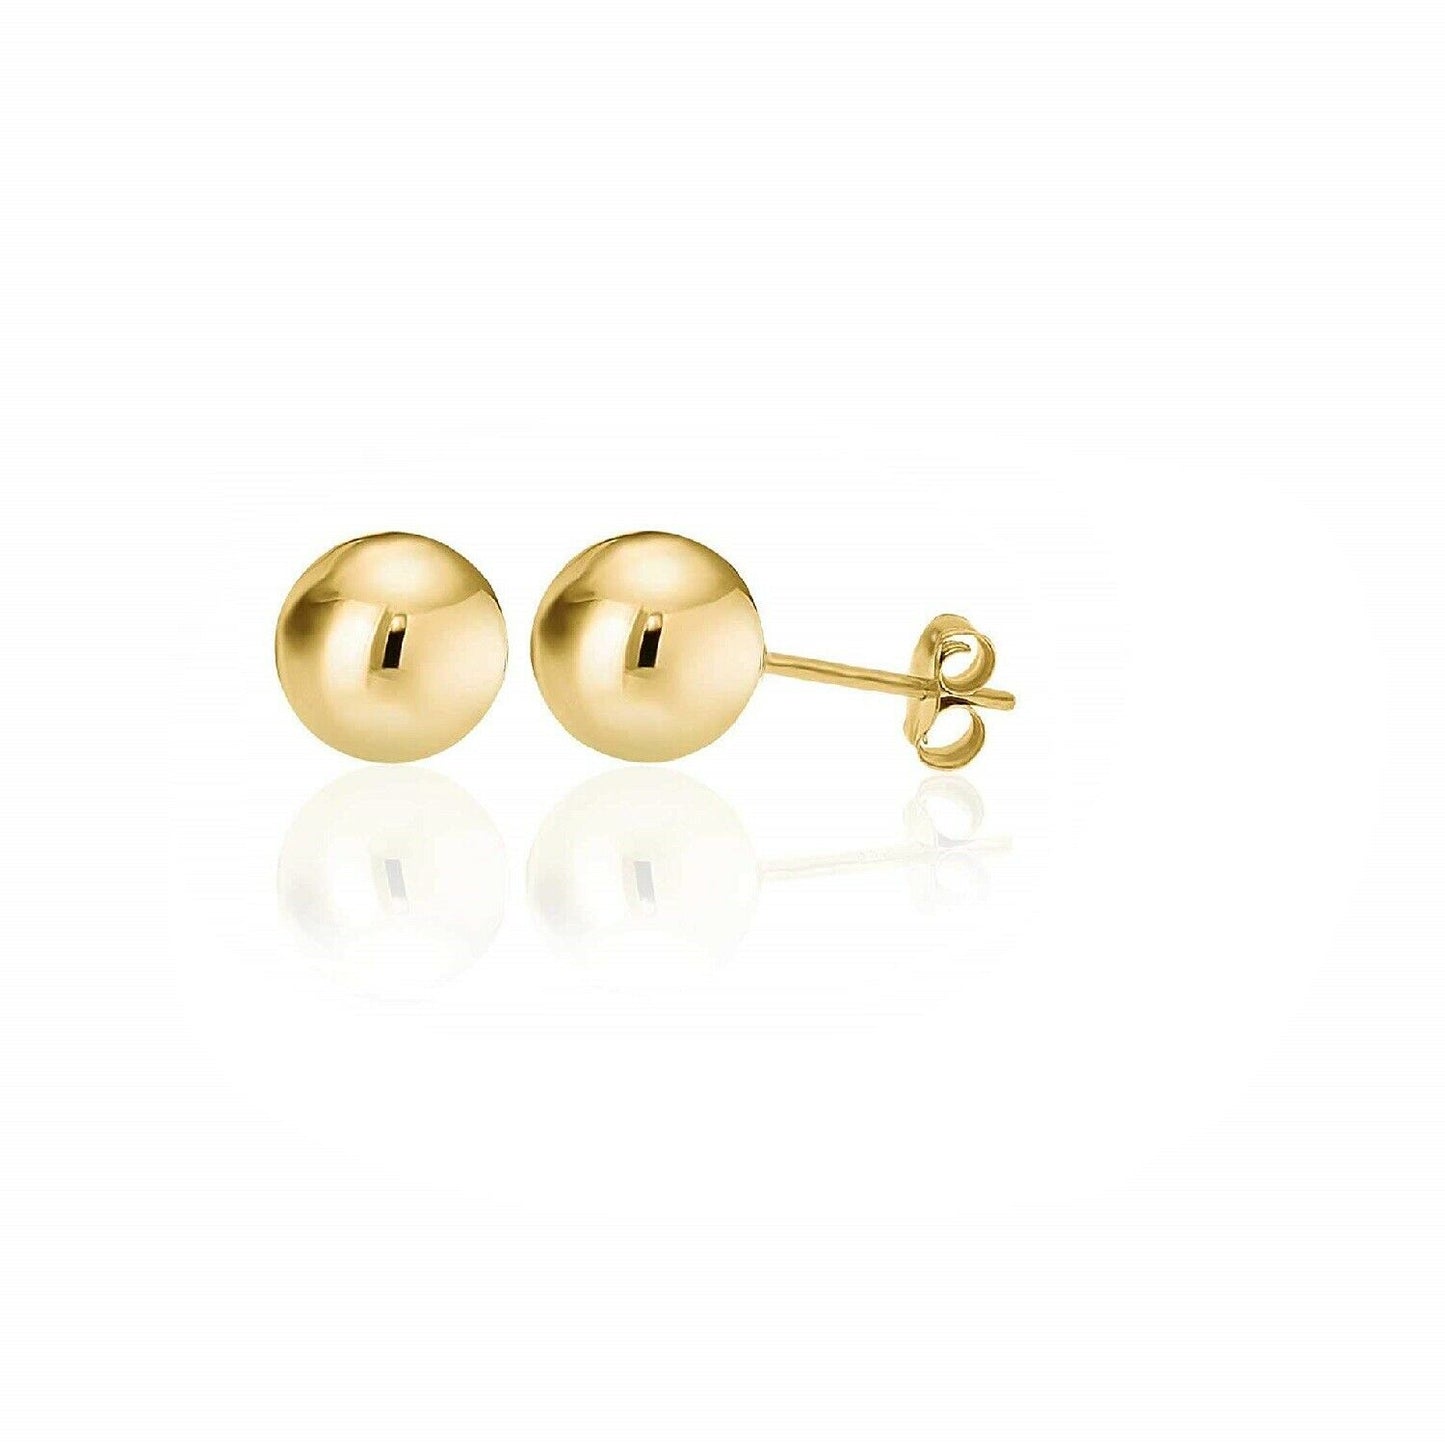 14k Solid Yellow Gold Hollow Ball Stud Earrings- Sold as a Pair 20ga